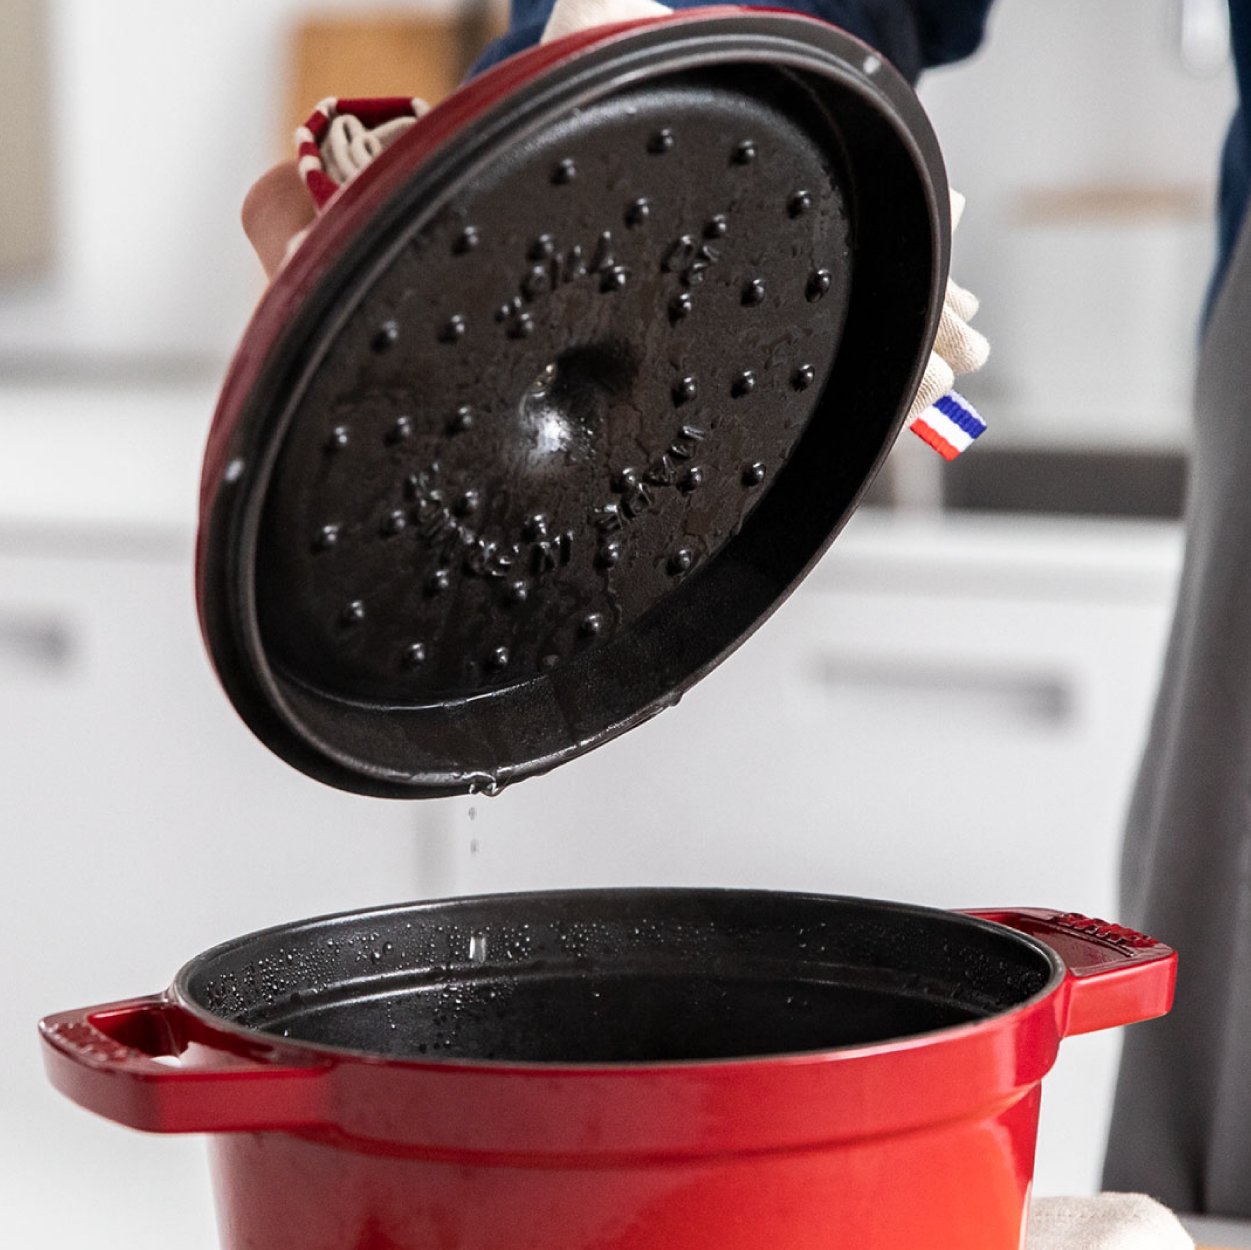 https://www.zwilling.com/on/demandware.static/-/Sites-zwilling-us-Library/default/dw1029ef5e/images/product-content/masonry-content/staub/cast-iron/cocotte/TallCocottes_Mason_Comp_600-600_TallCocotte_2.jpg